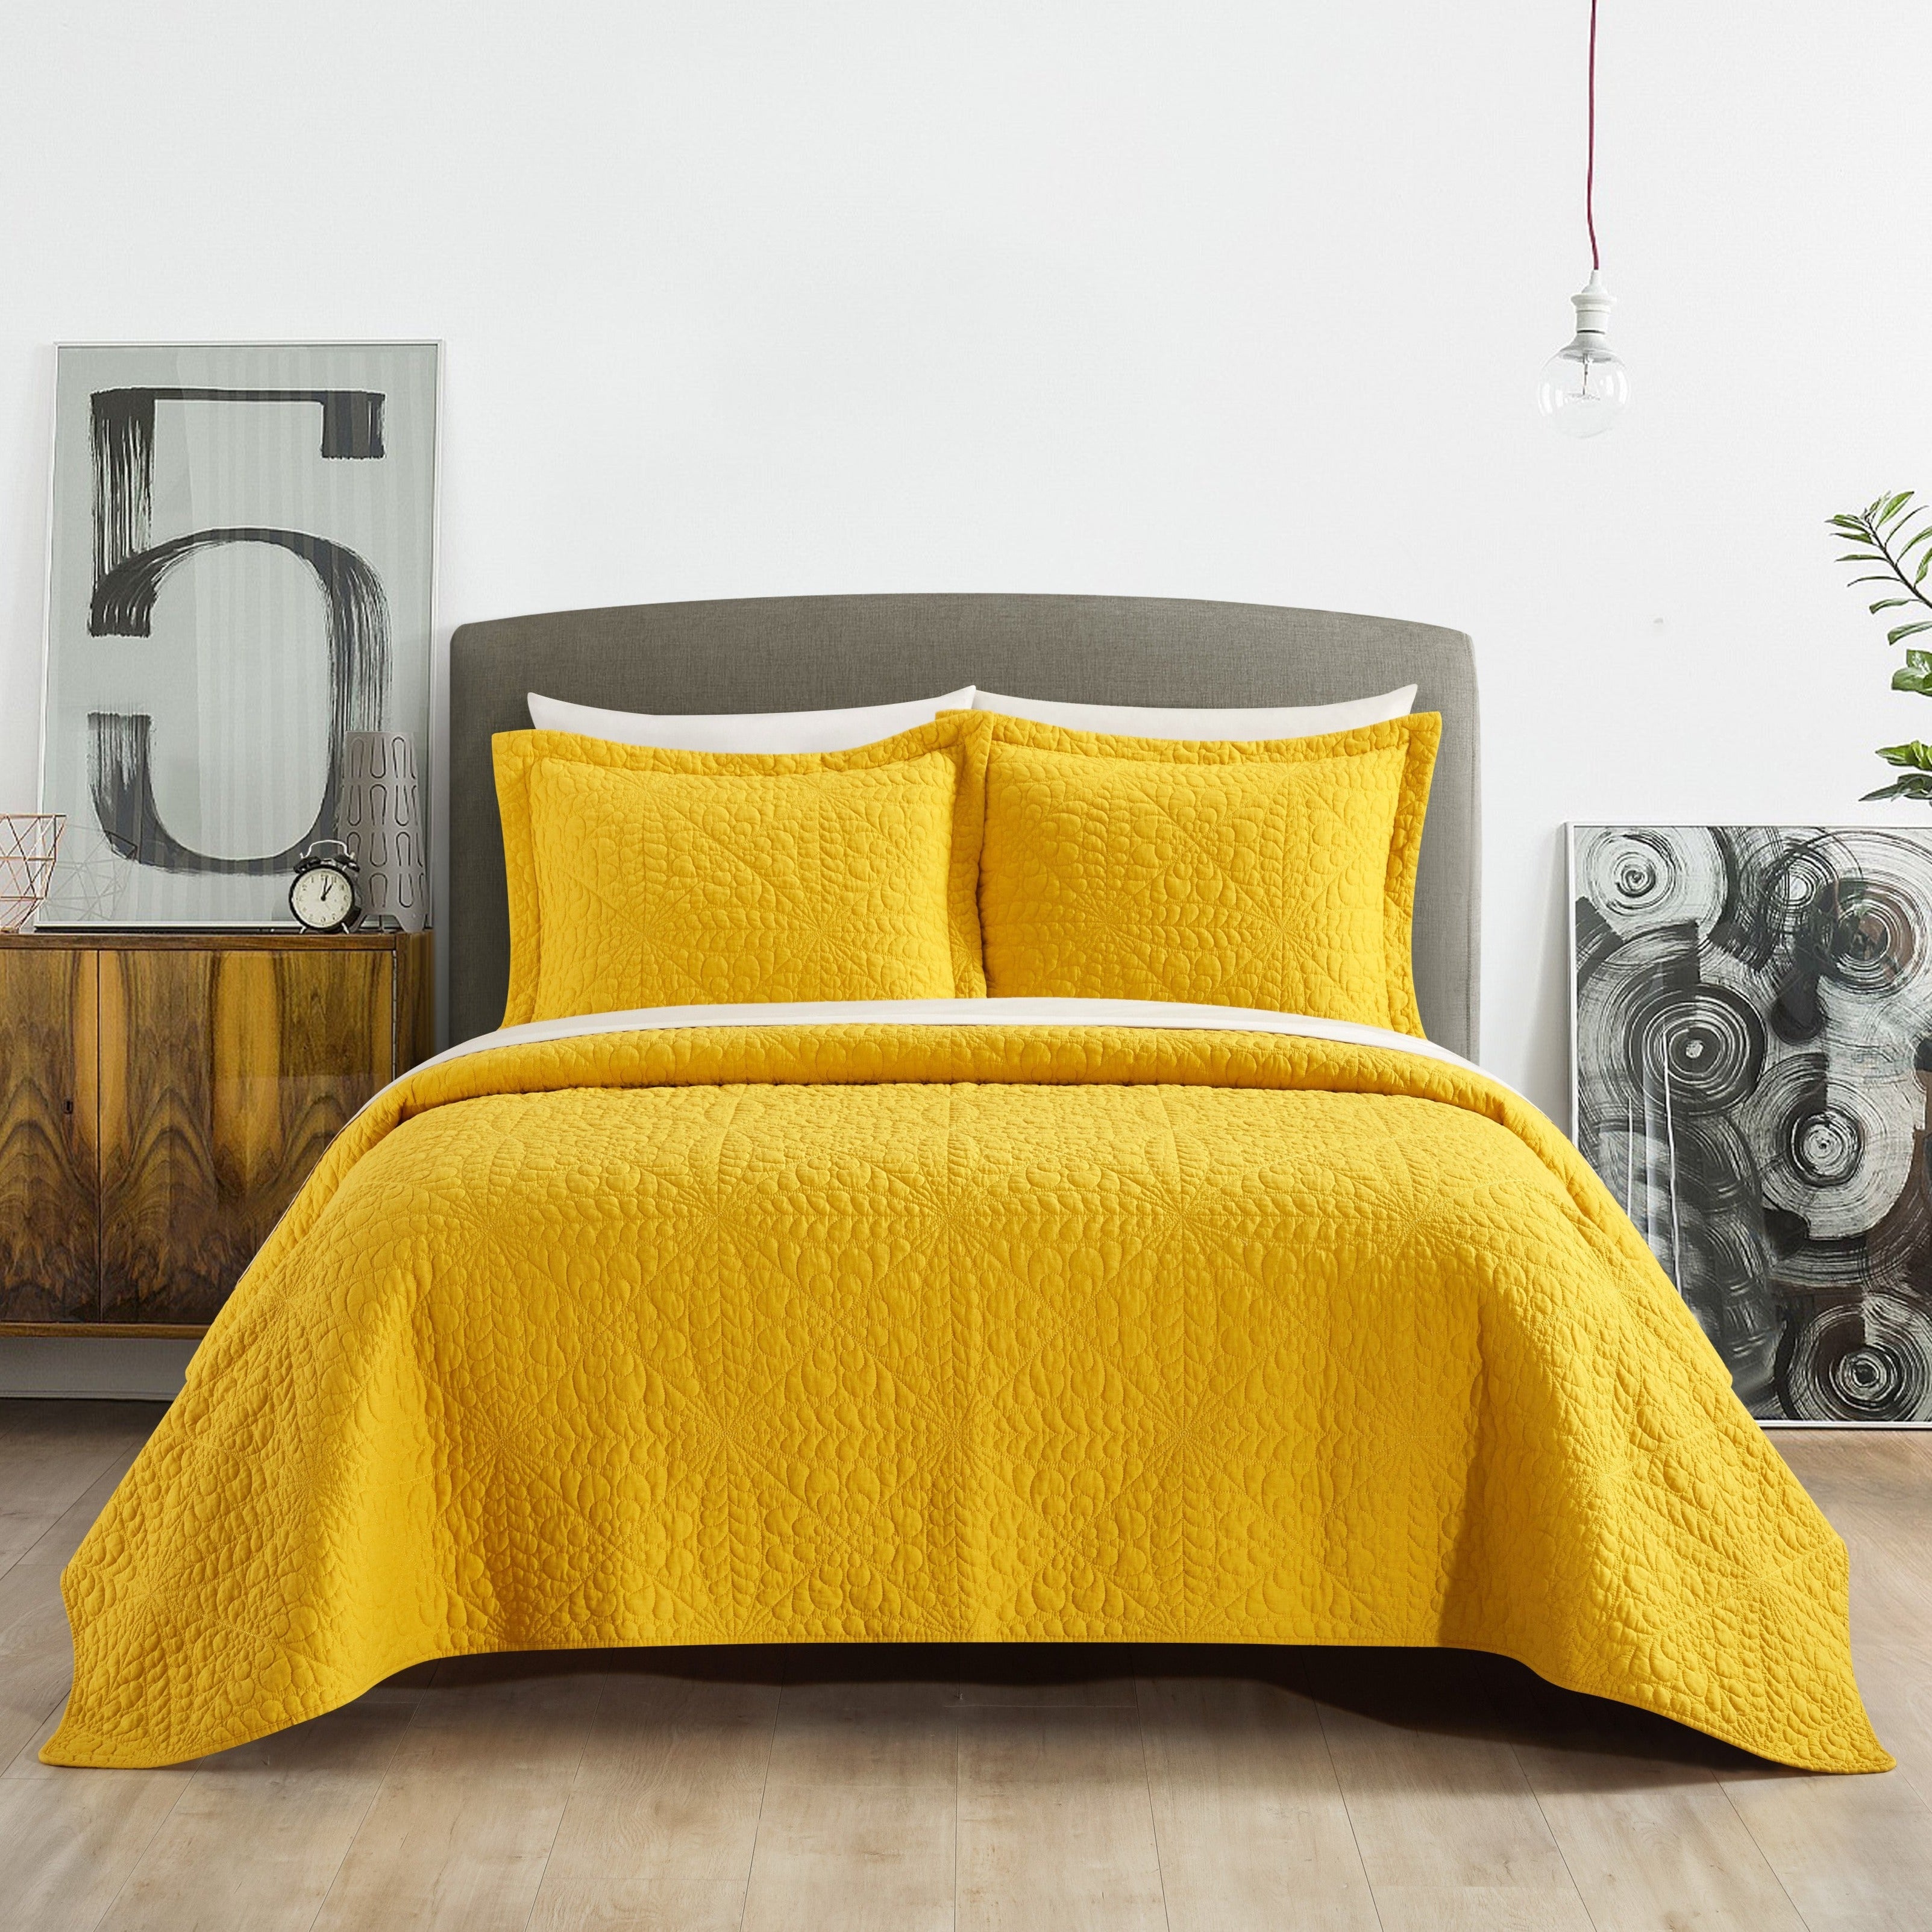 NY&C Home Babe 3 Piece Cotton Quilt Set Yellow